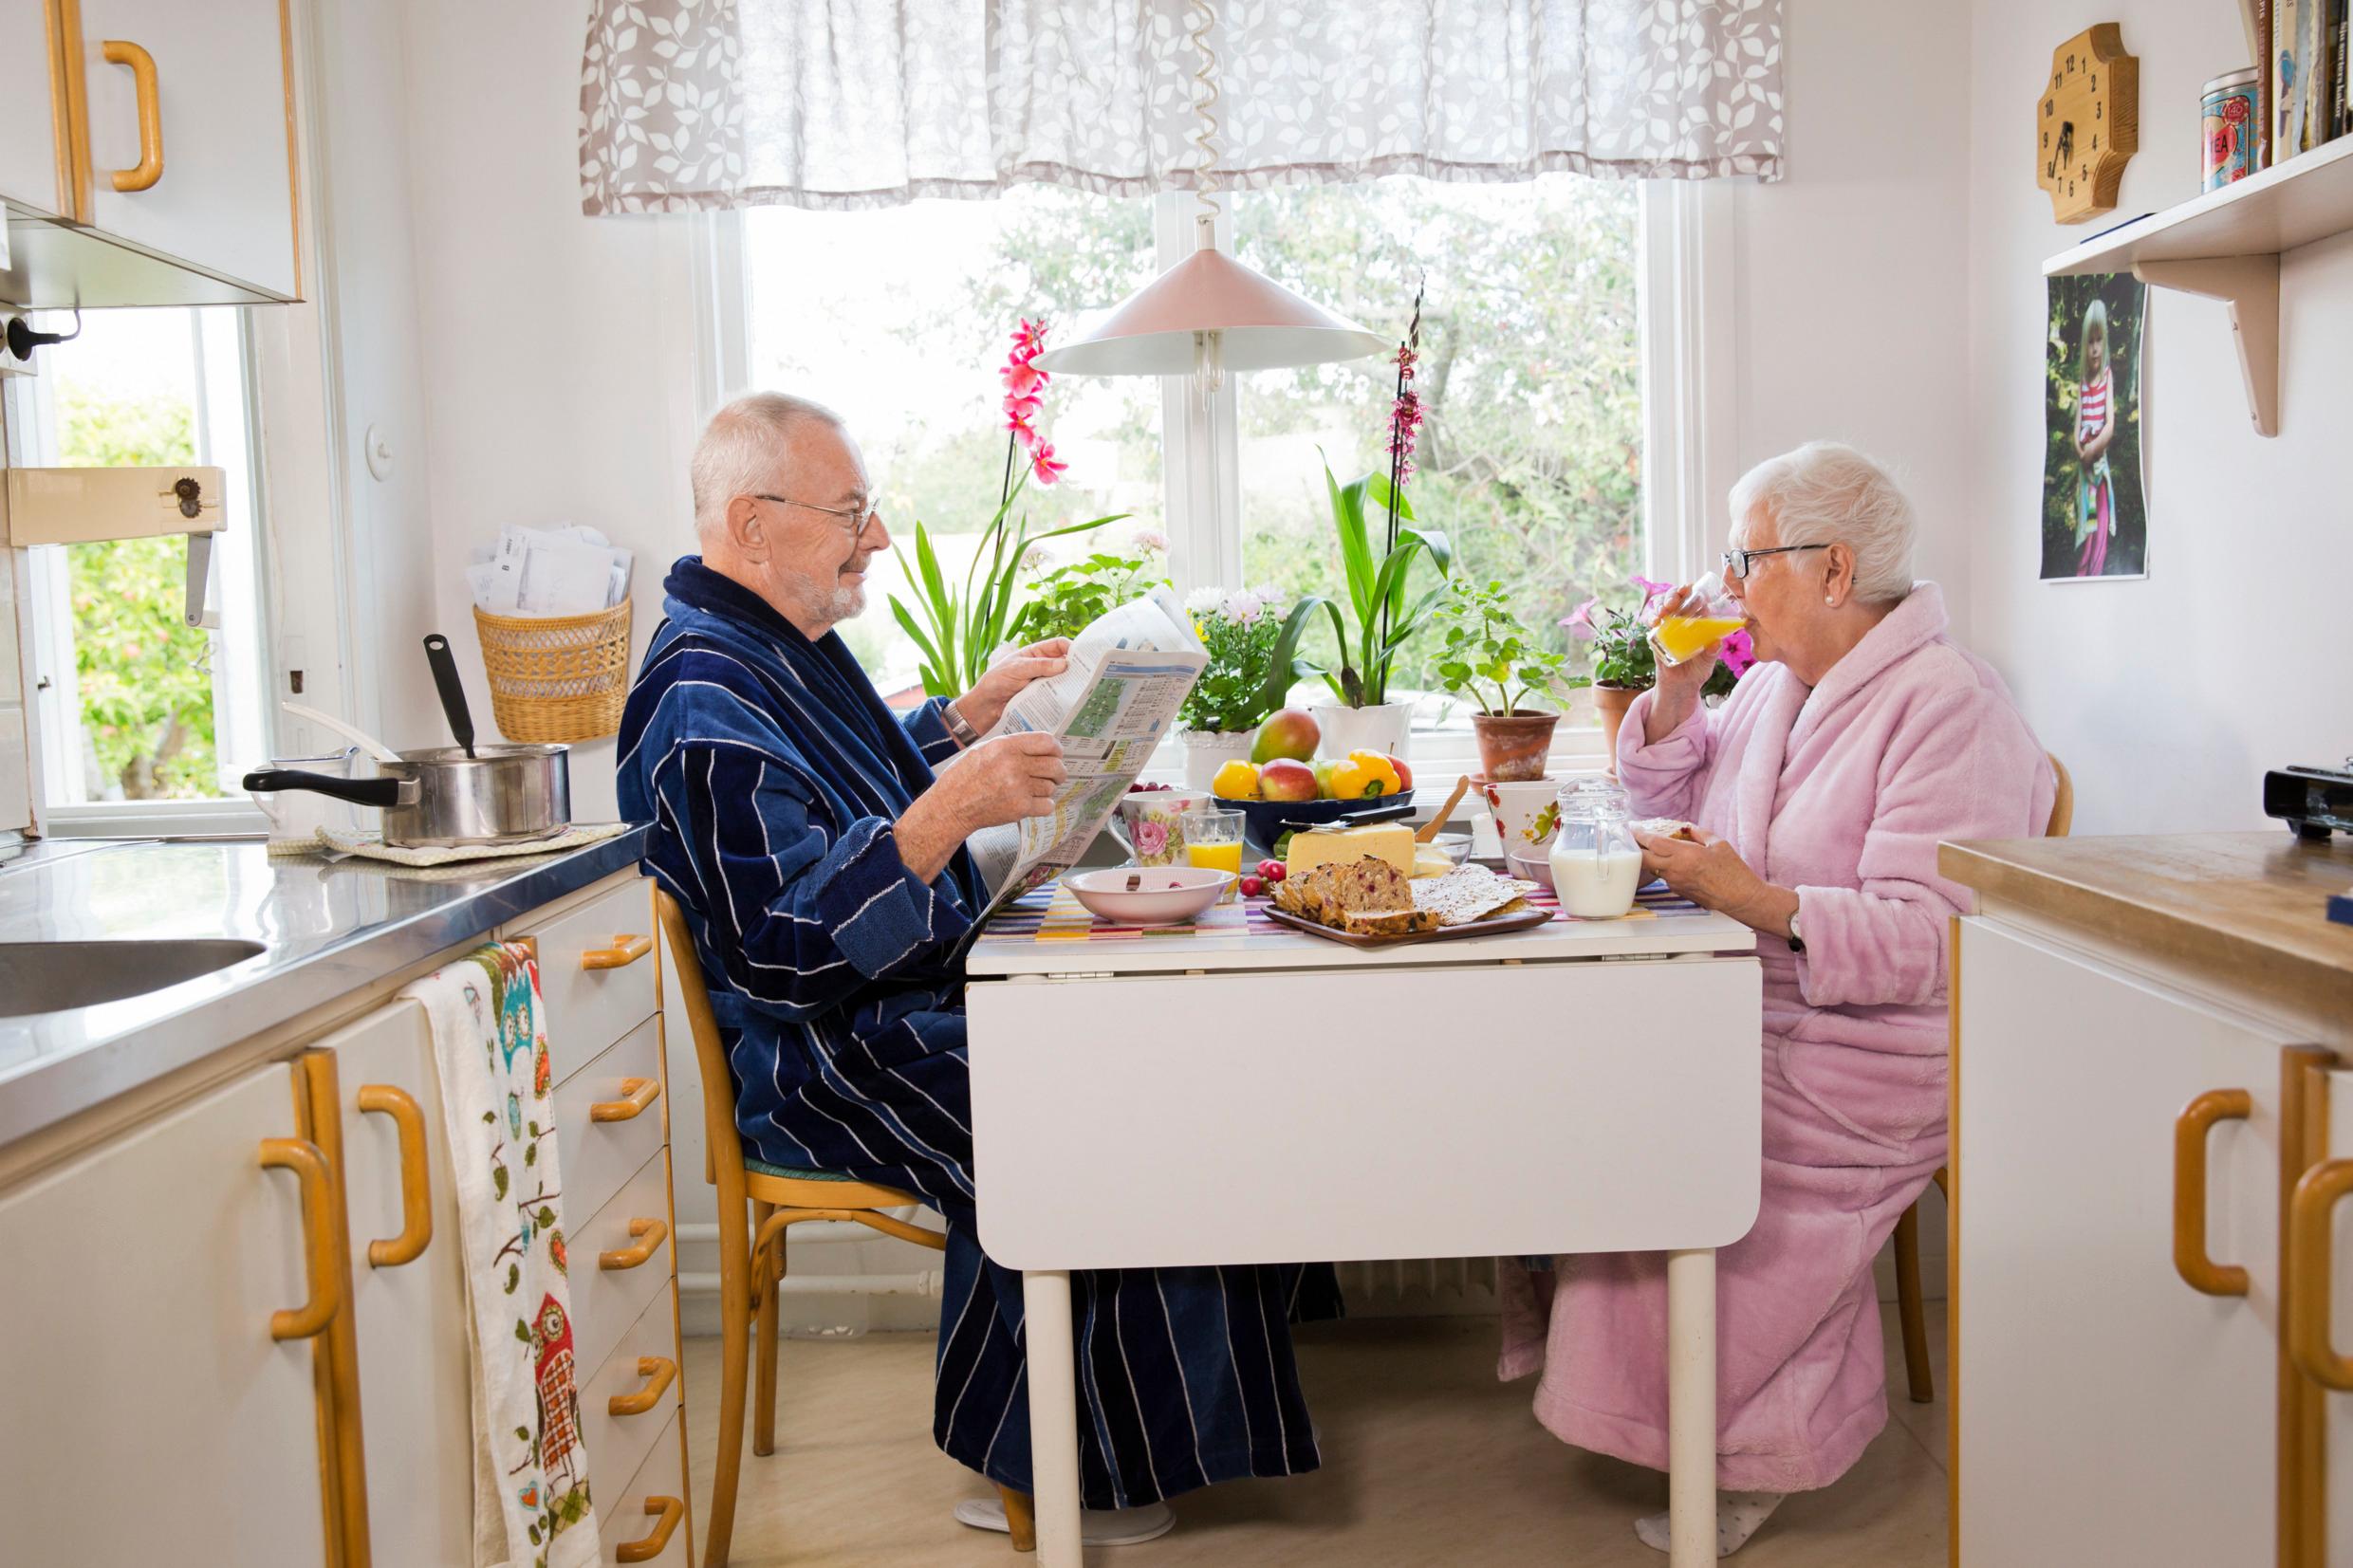 An elderly man and woman having breakfast in a kitchen, sitting on each side of a table.